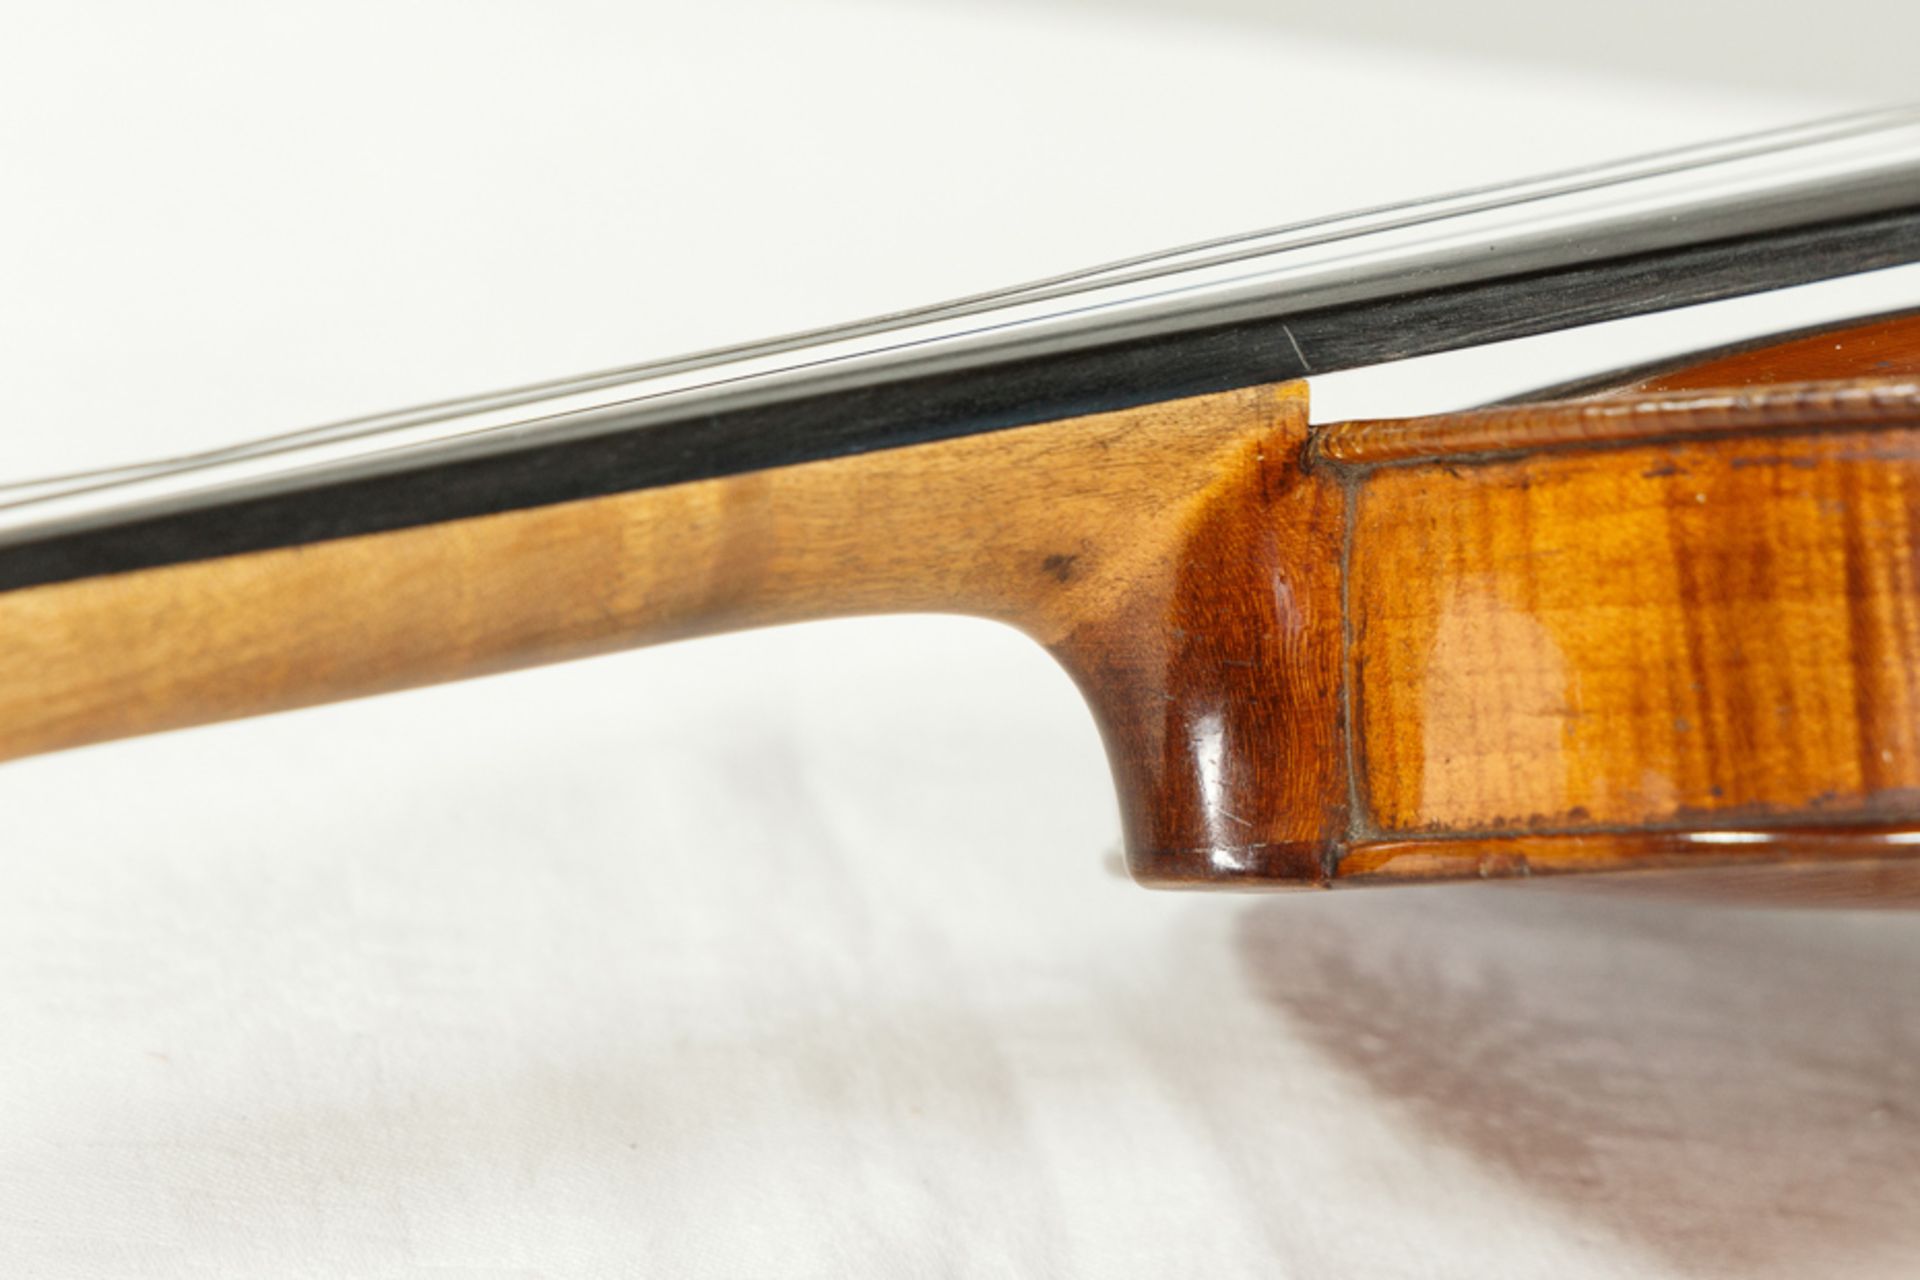 HISTORICAL ELEGANT VIOLIN WITH DECORATED BACK AND MATCHING CASE - Image 6 of 7